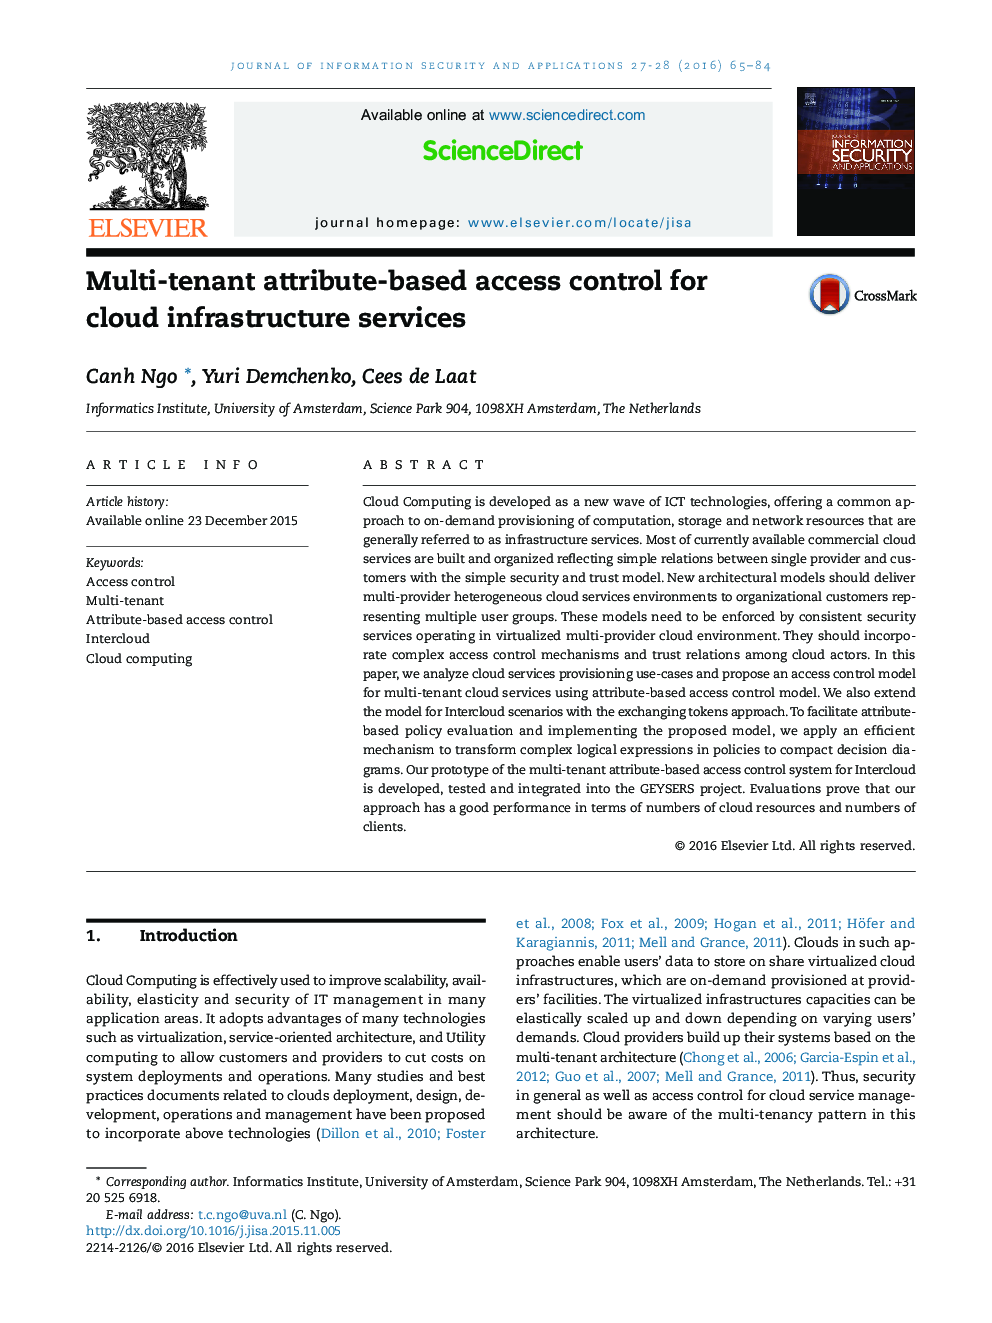 Multi-tenant attribute-based access control for cloud infrastructure services